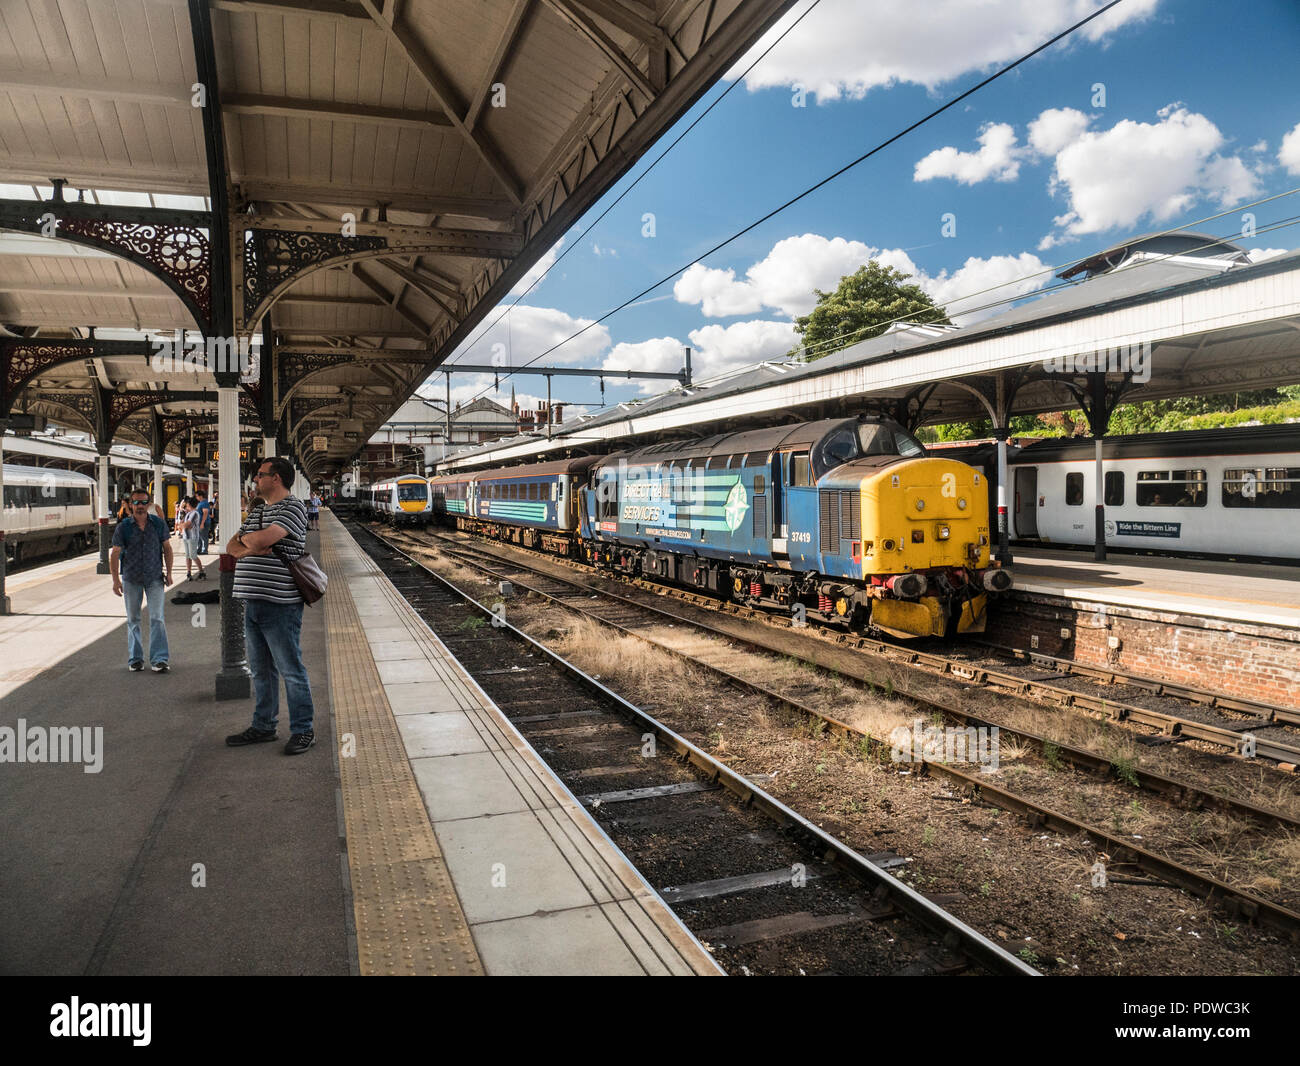 Direct Rail Services class 37 37419 'Carl Haviland' on the Norwich to Lowestoft service August 2018. The train consists of 4 coaches with a class 37 Stock Photo